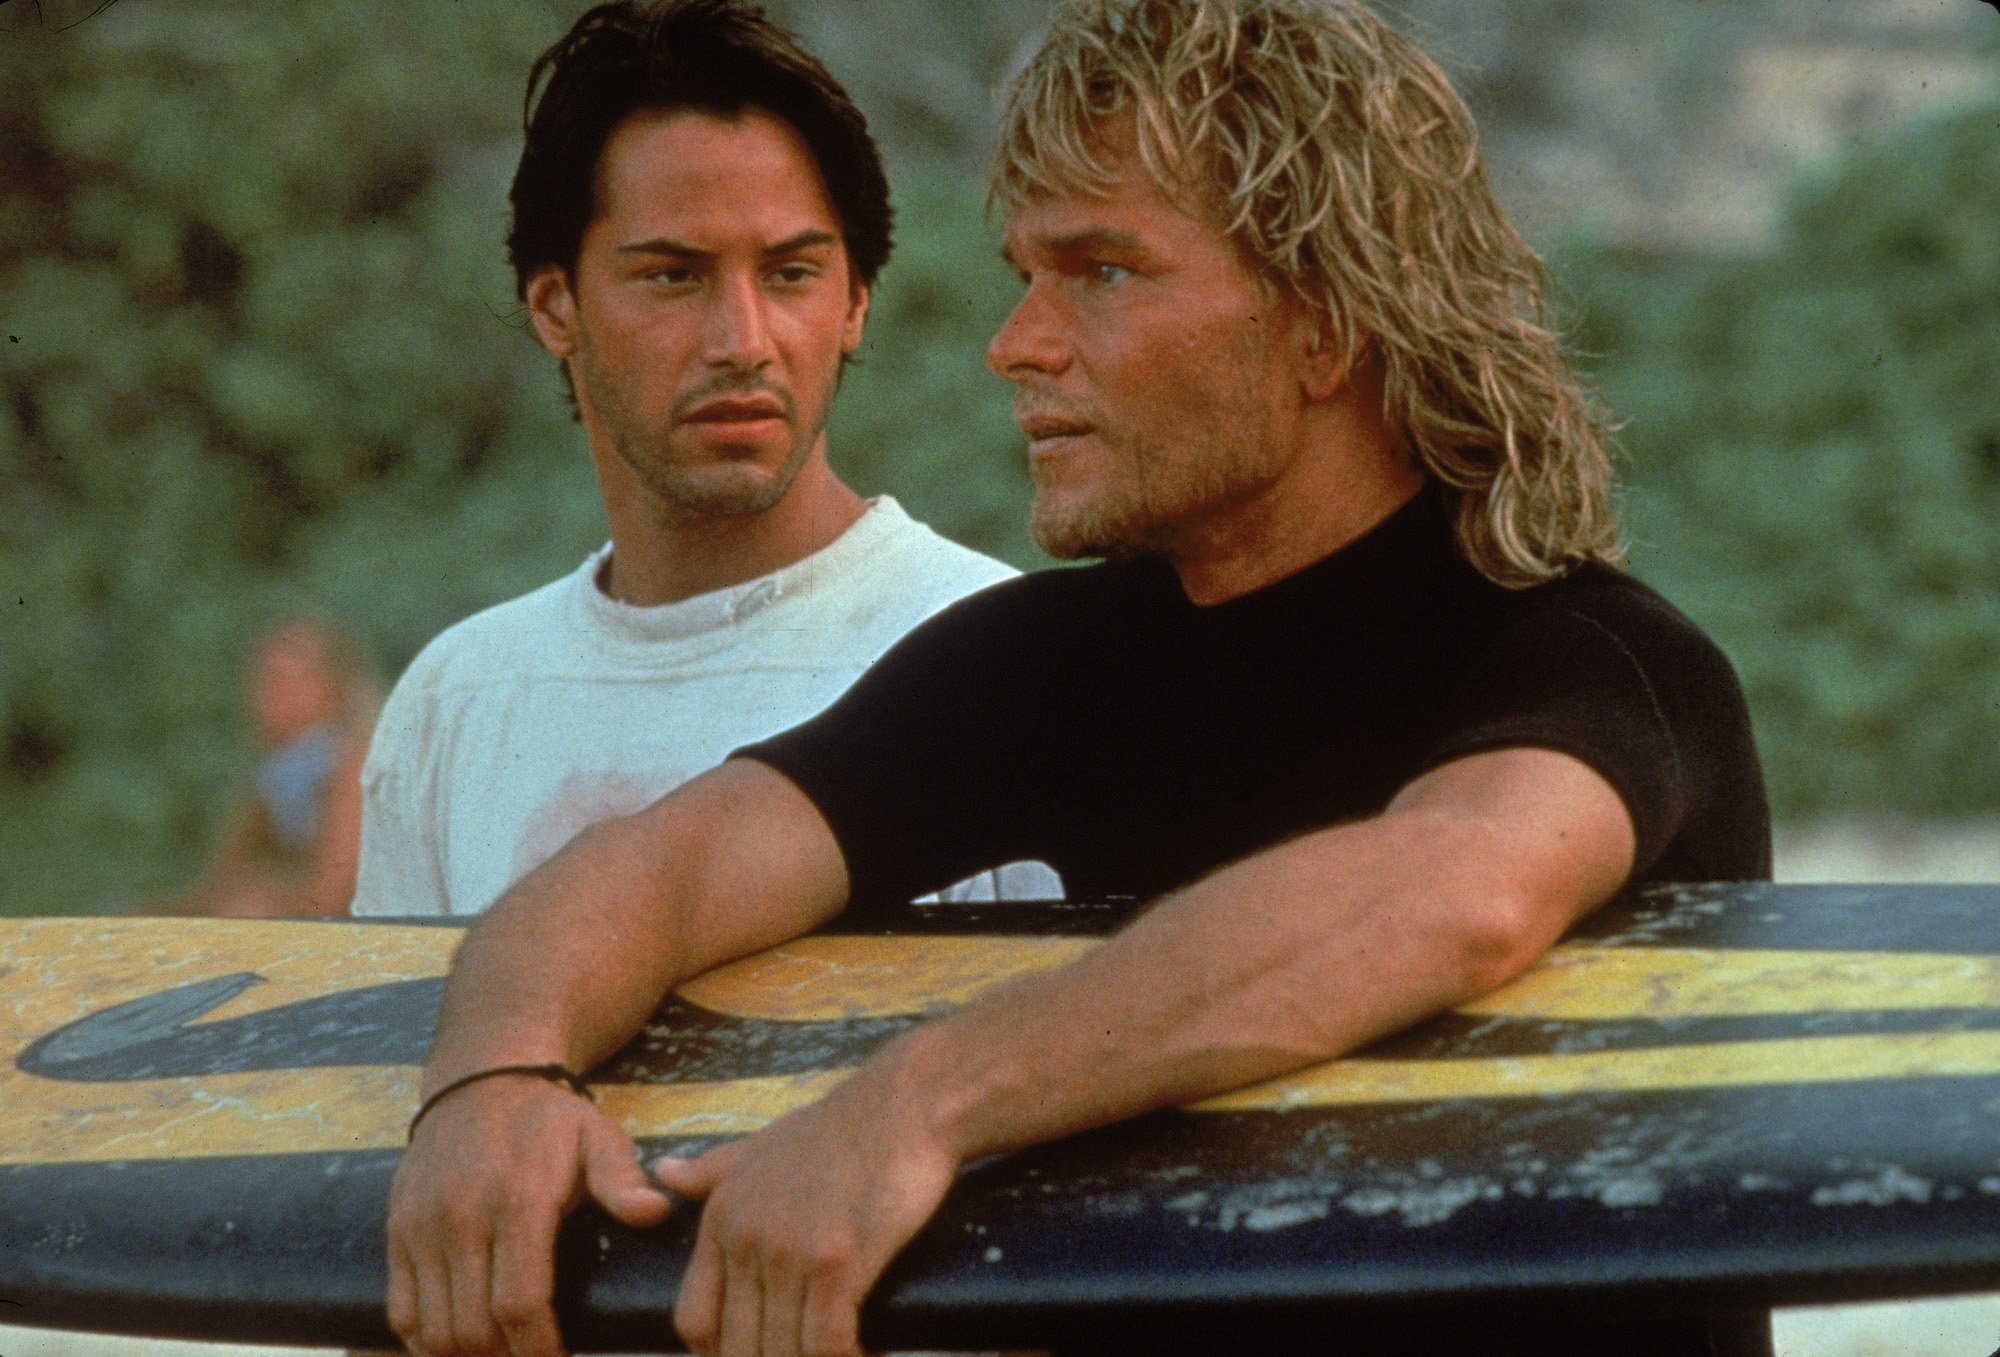 Keanu Reeves Movie ‘Point Break’ Almost Had a Sequel Without Him, but With Patrick Swayze